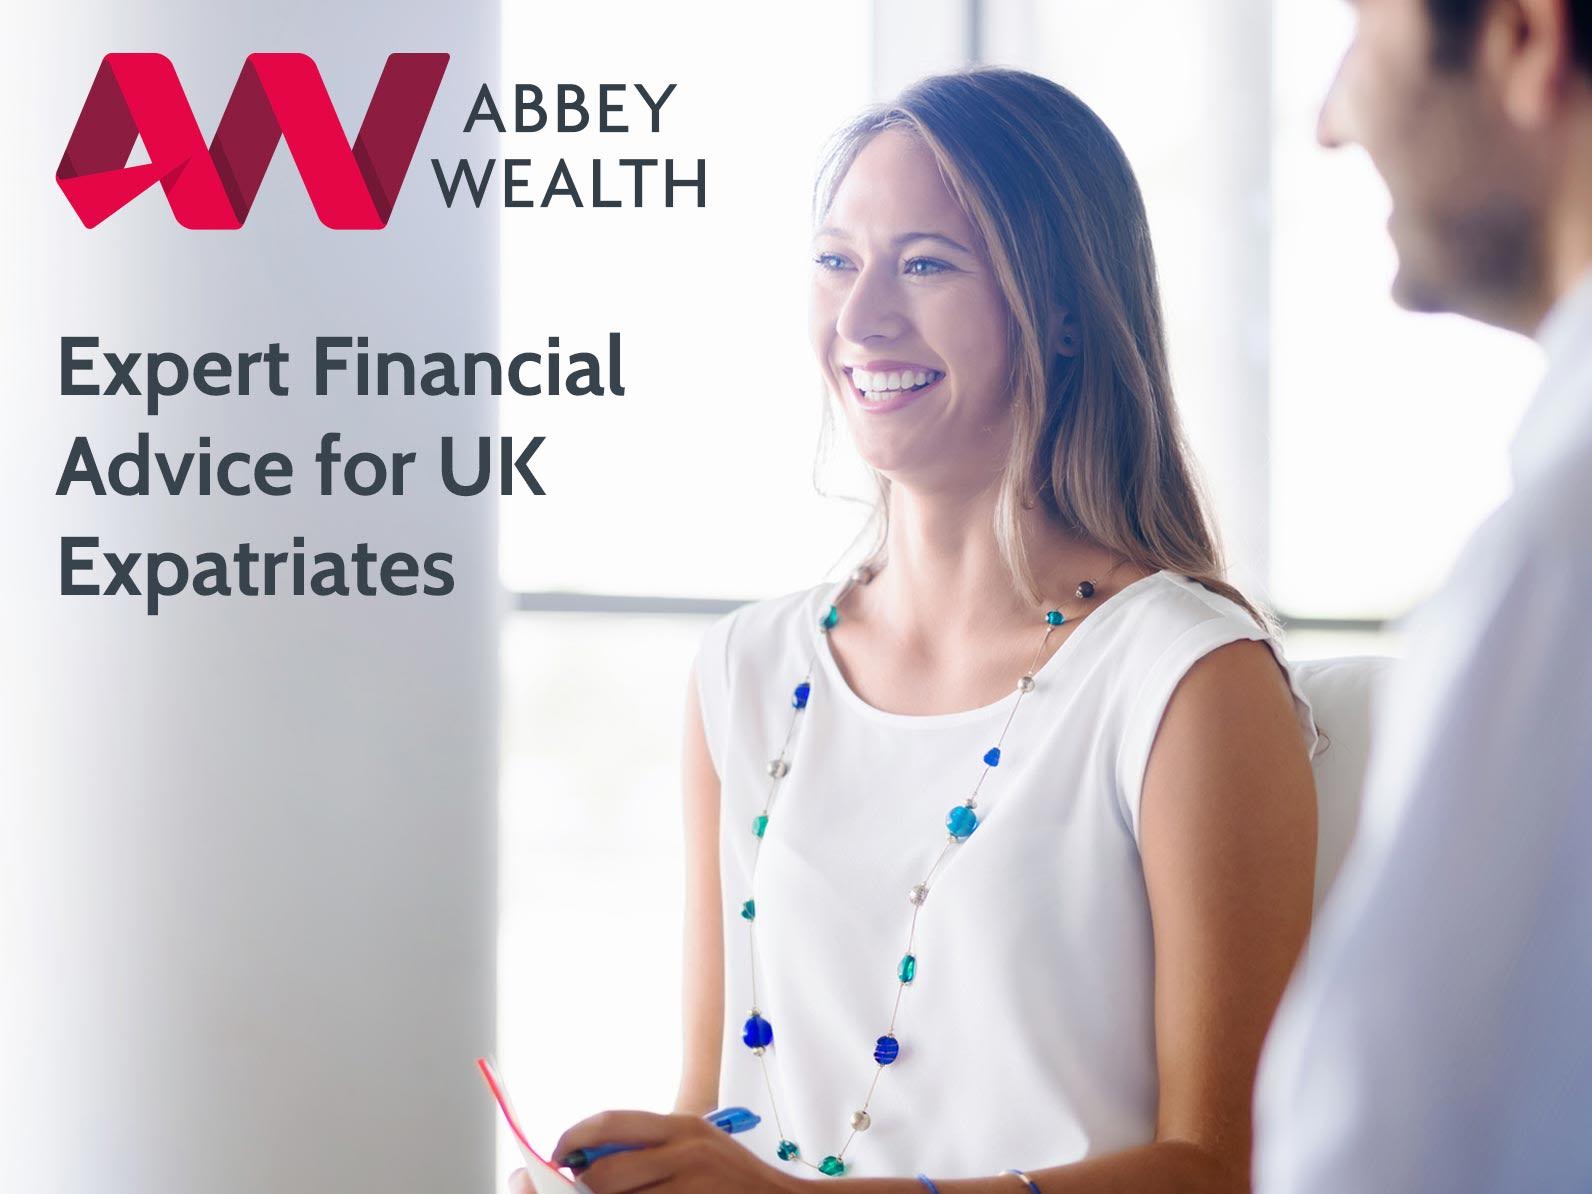 Contact Us | Abbey Wealth | Expatriate Financial Services